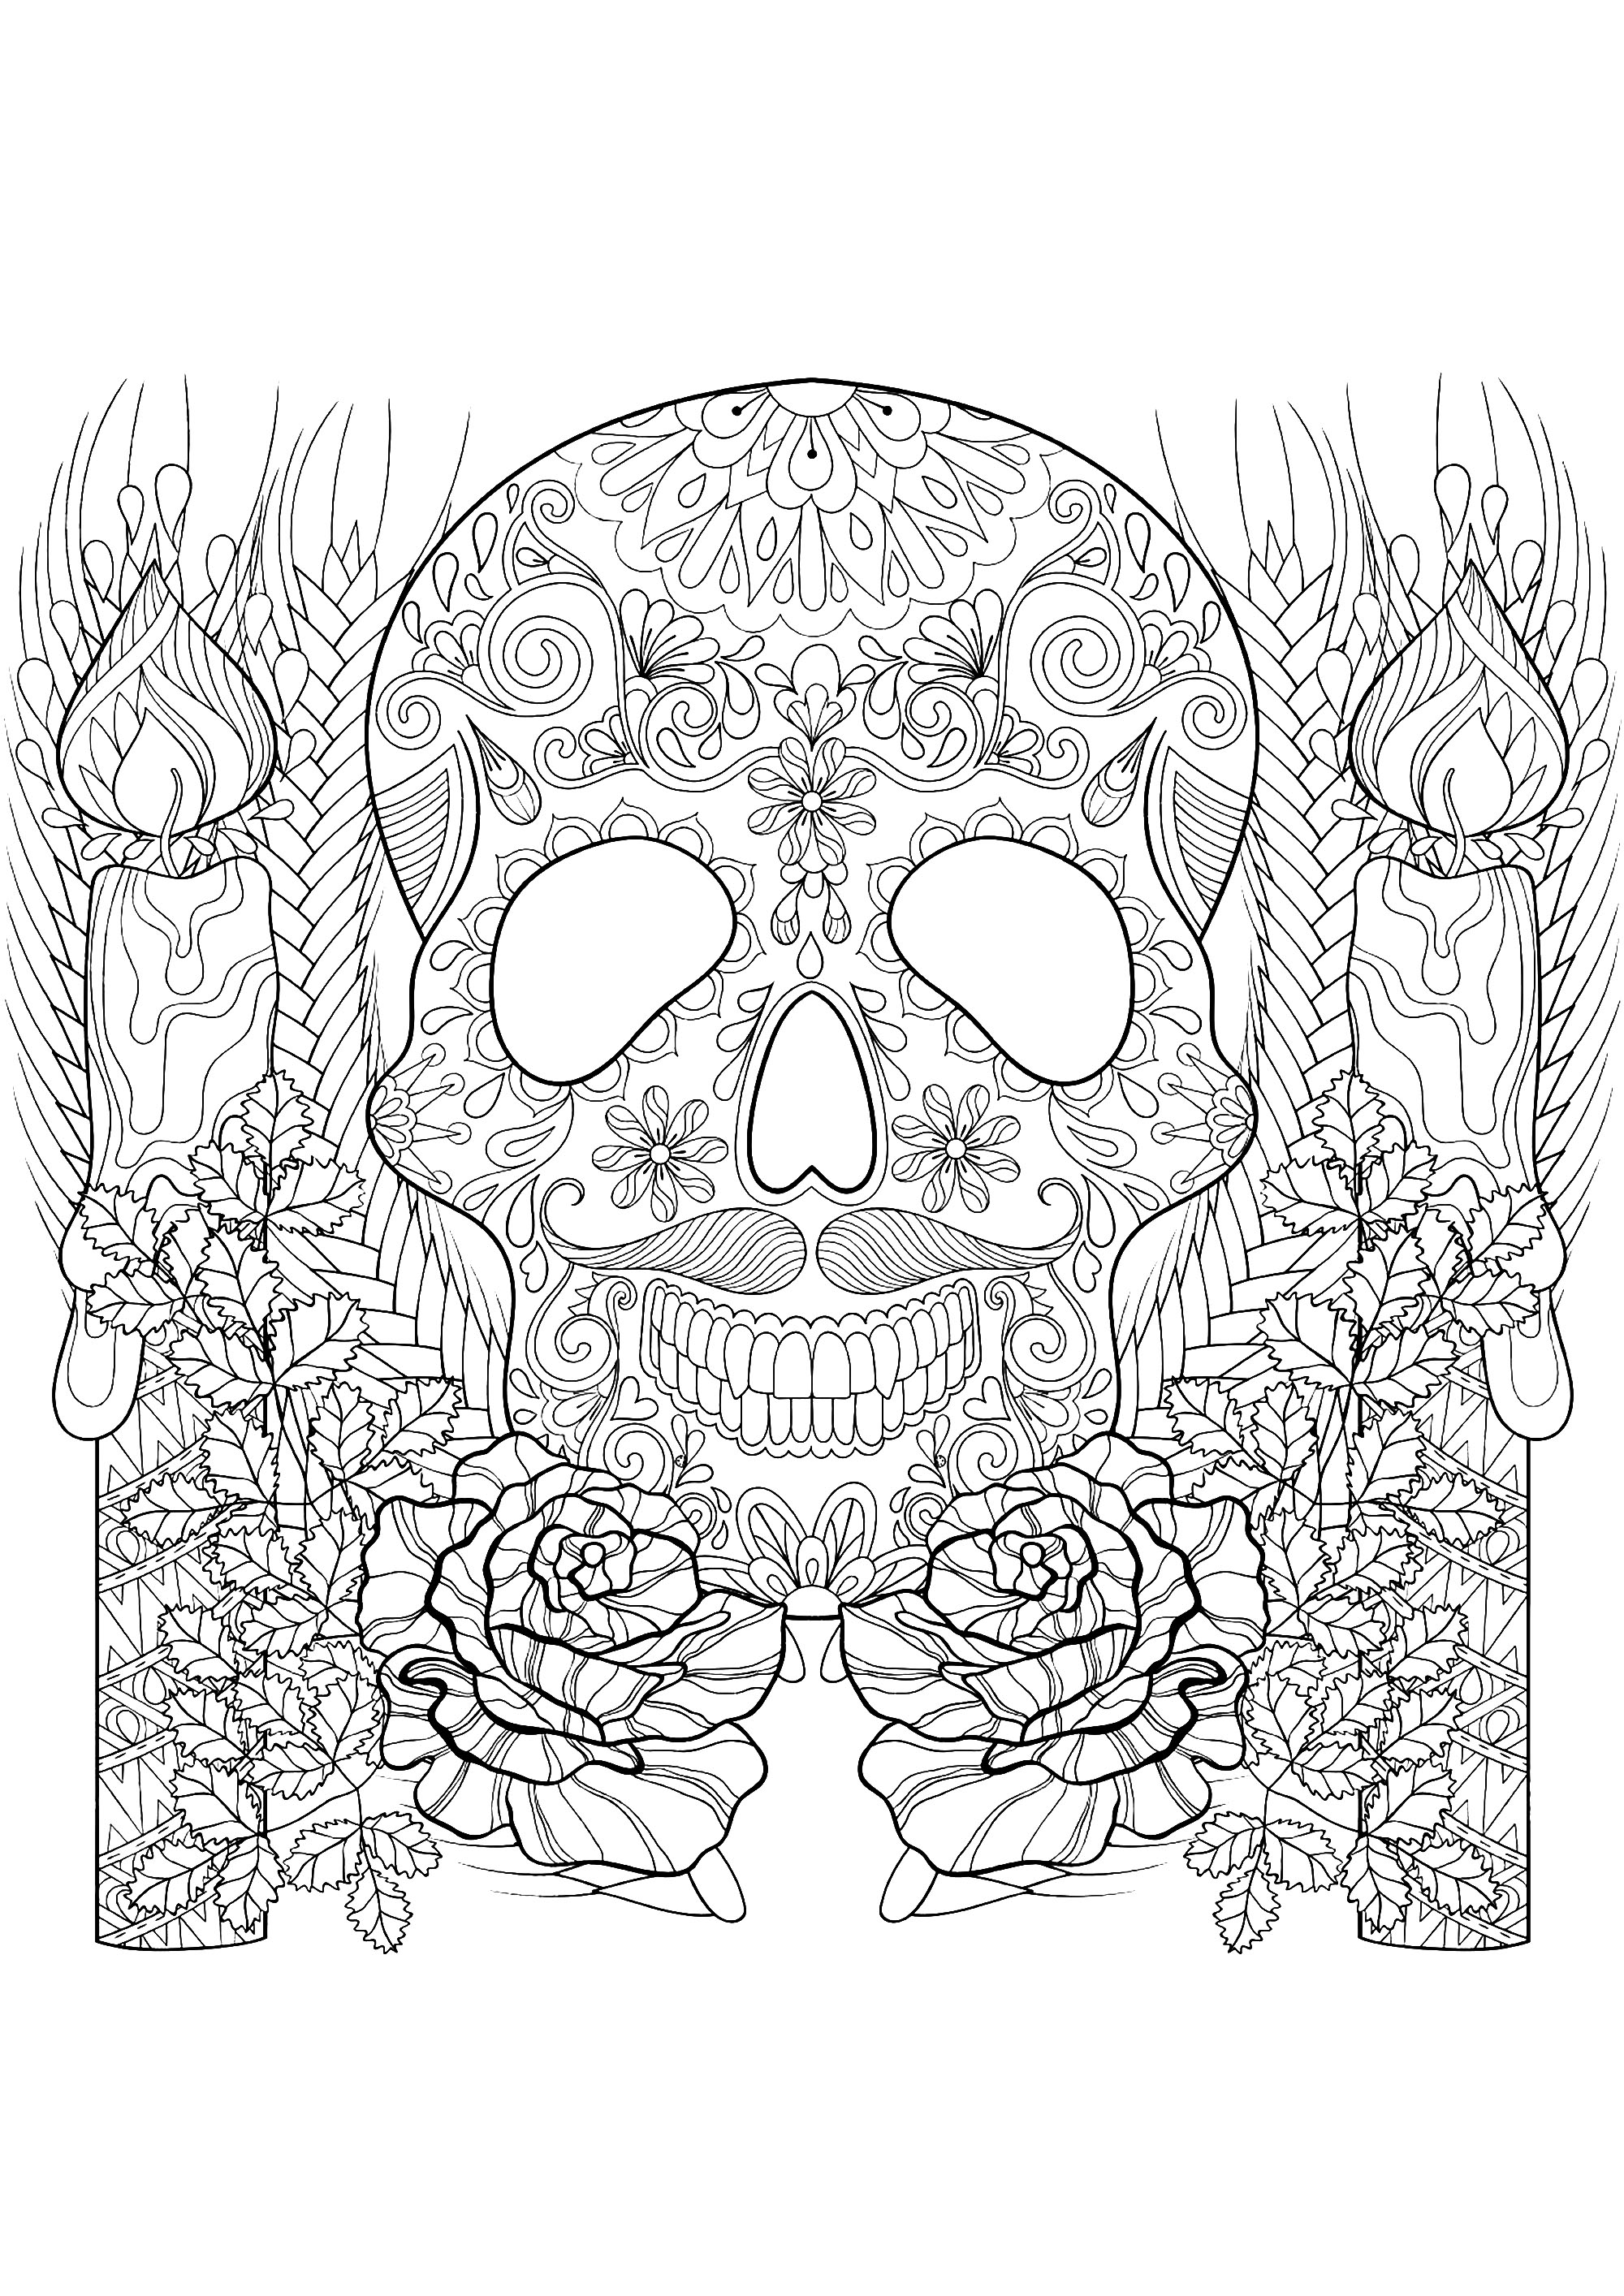 Download Skull and candles - Halloween Adult Coloring Pages